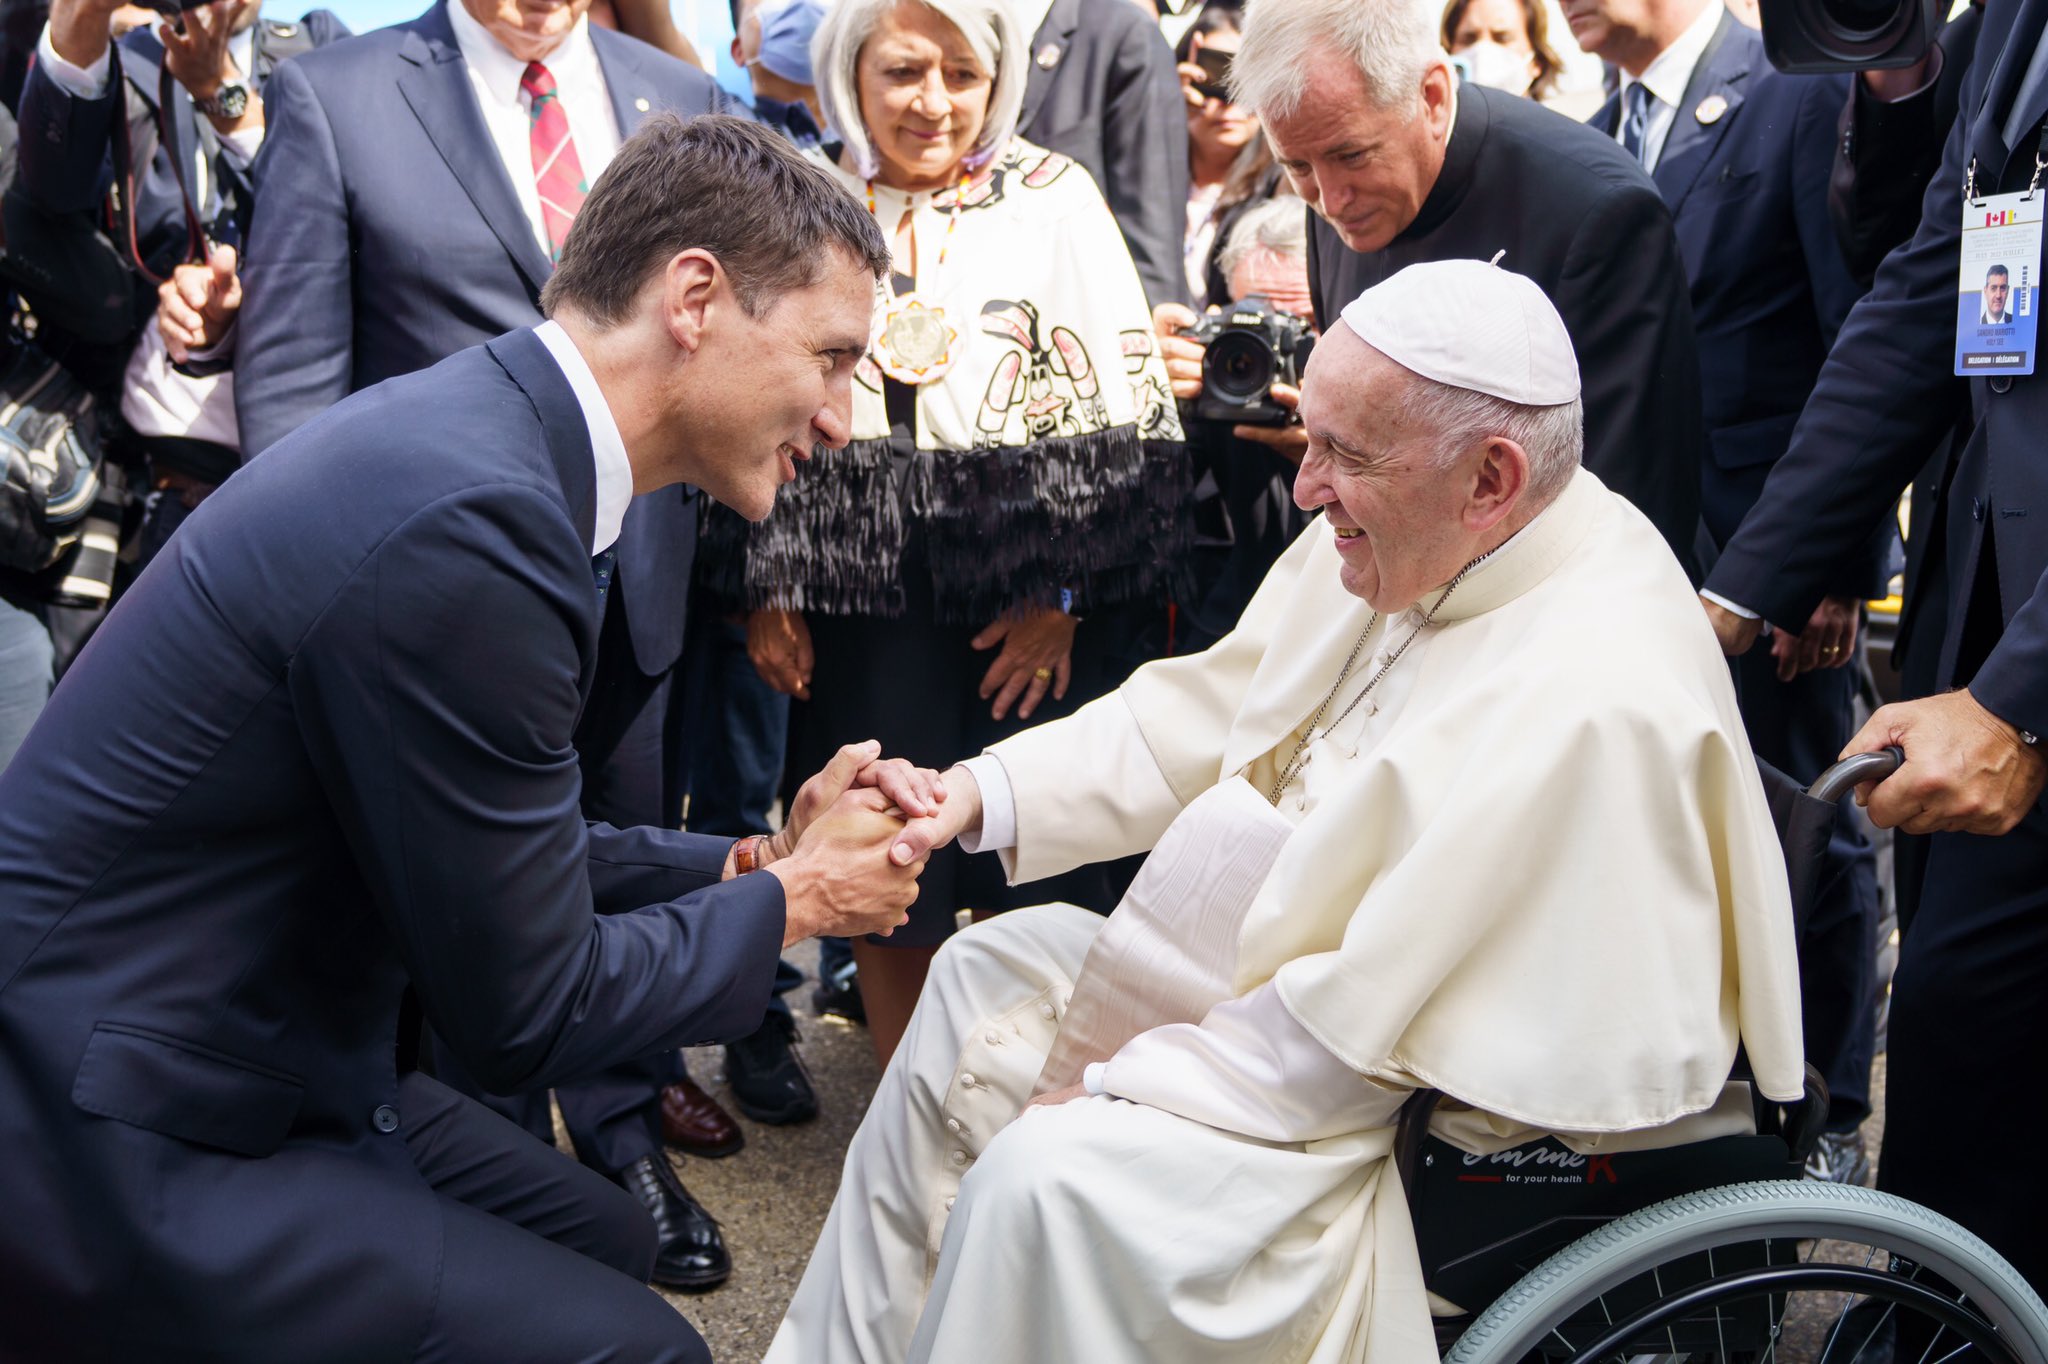 Canadian Prime Minister Justin Trudeau greets Pope Francis